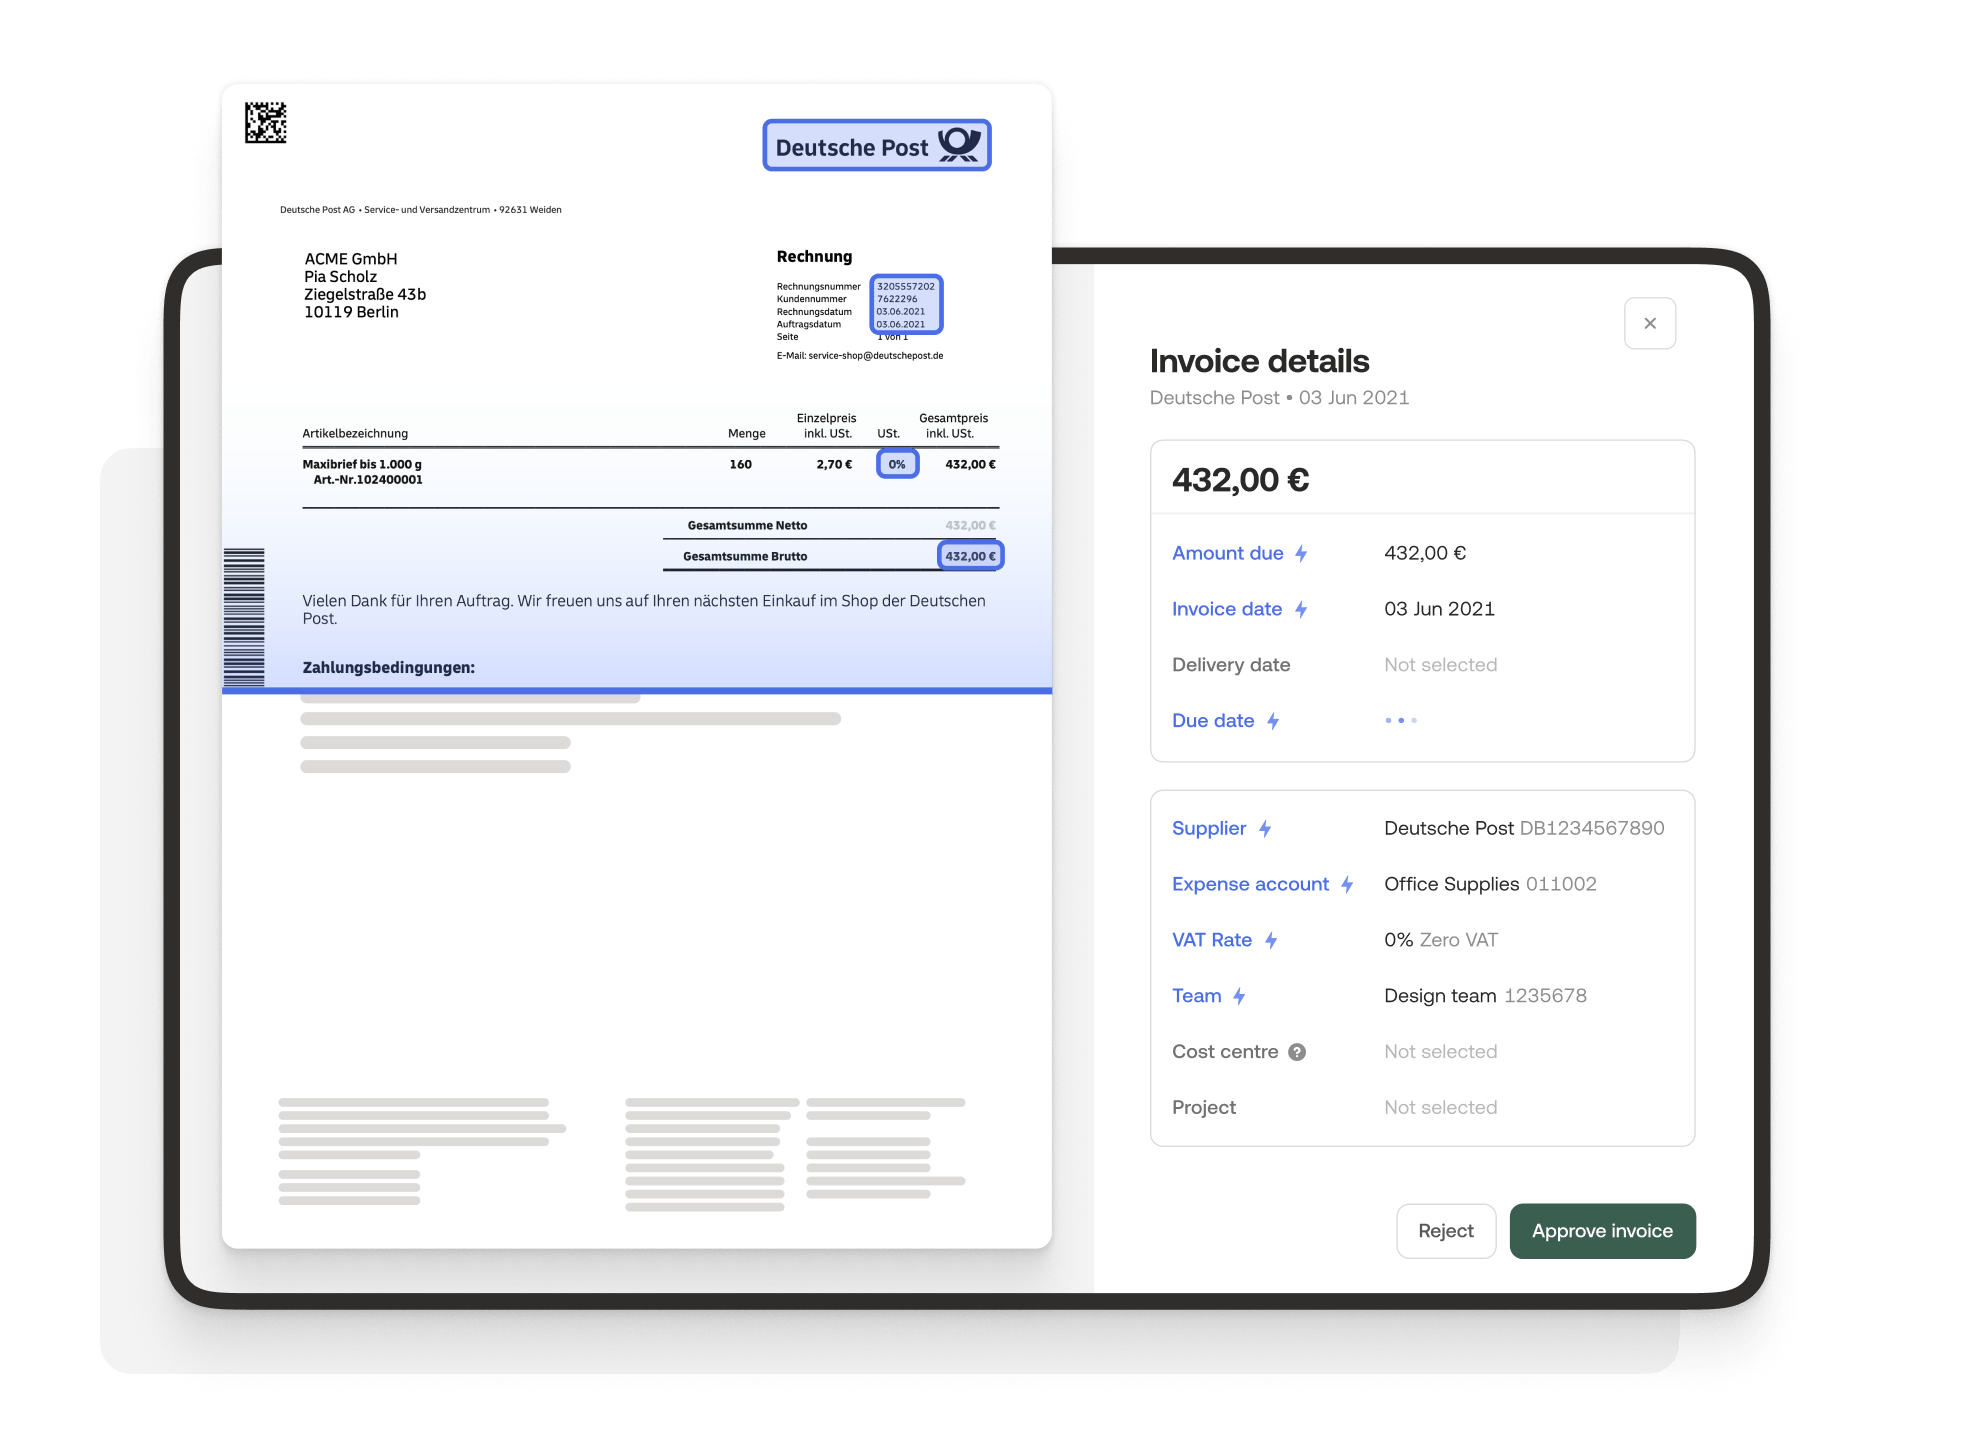 Invoice details in the Moss platform